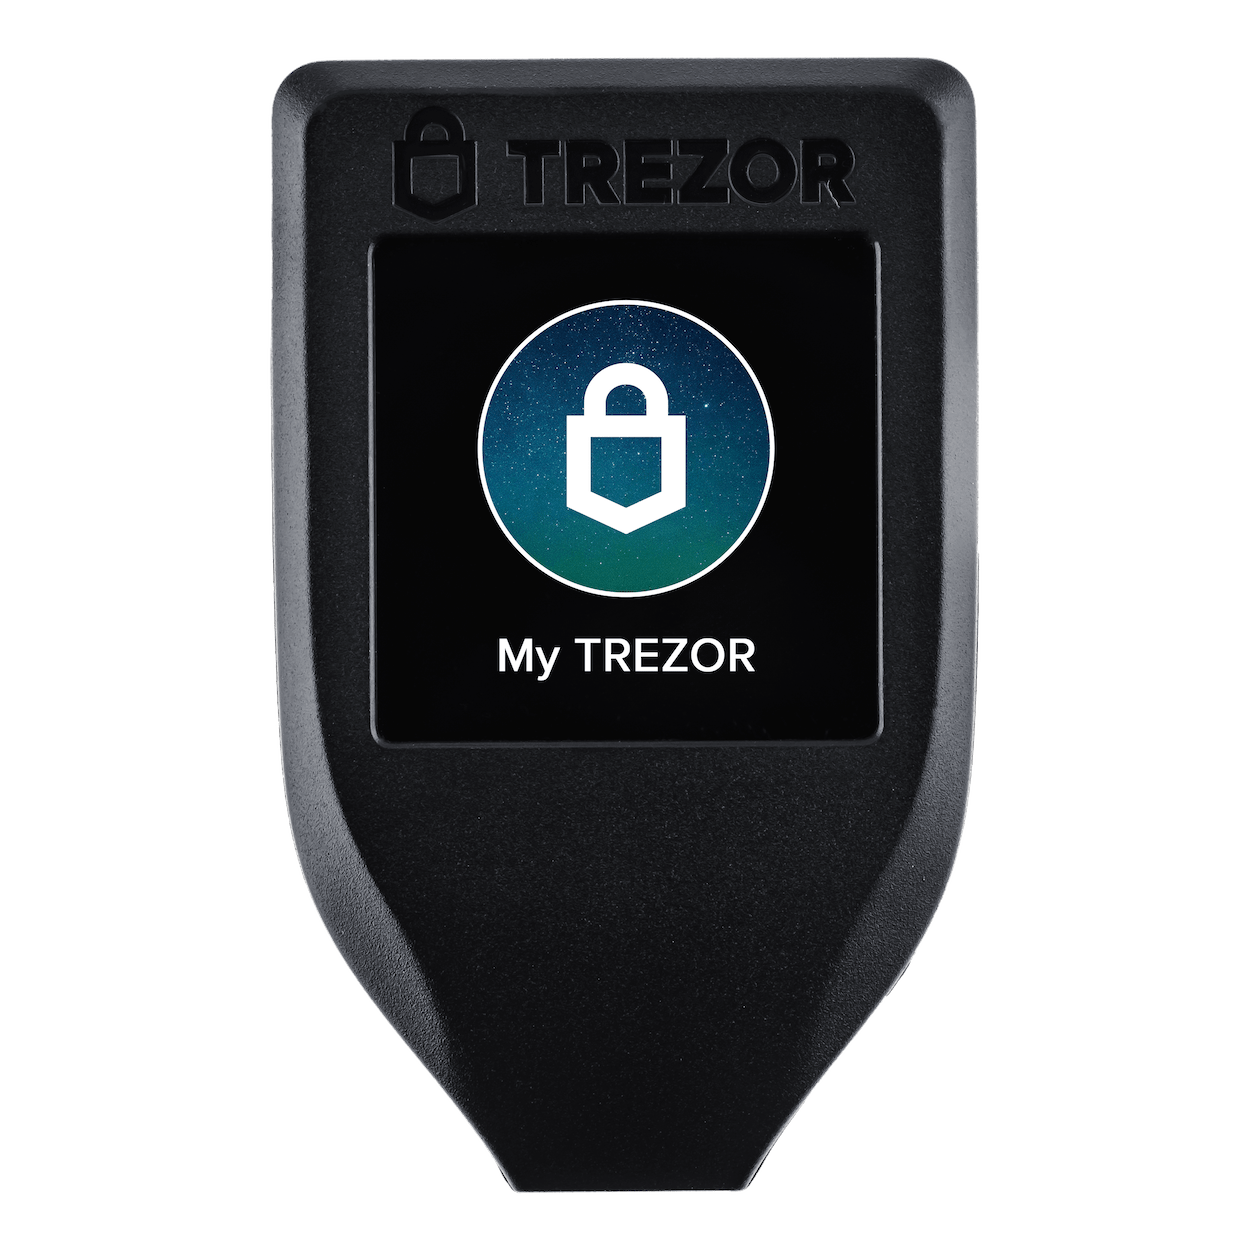 How to stake Cryptocurrency Assets with your Trezor Hardware Wallet